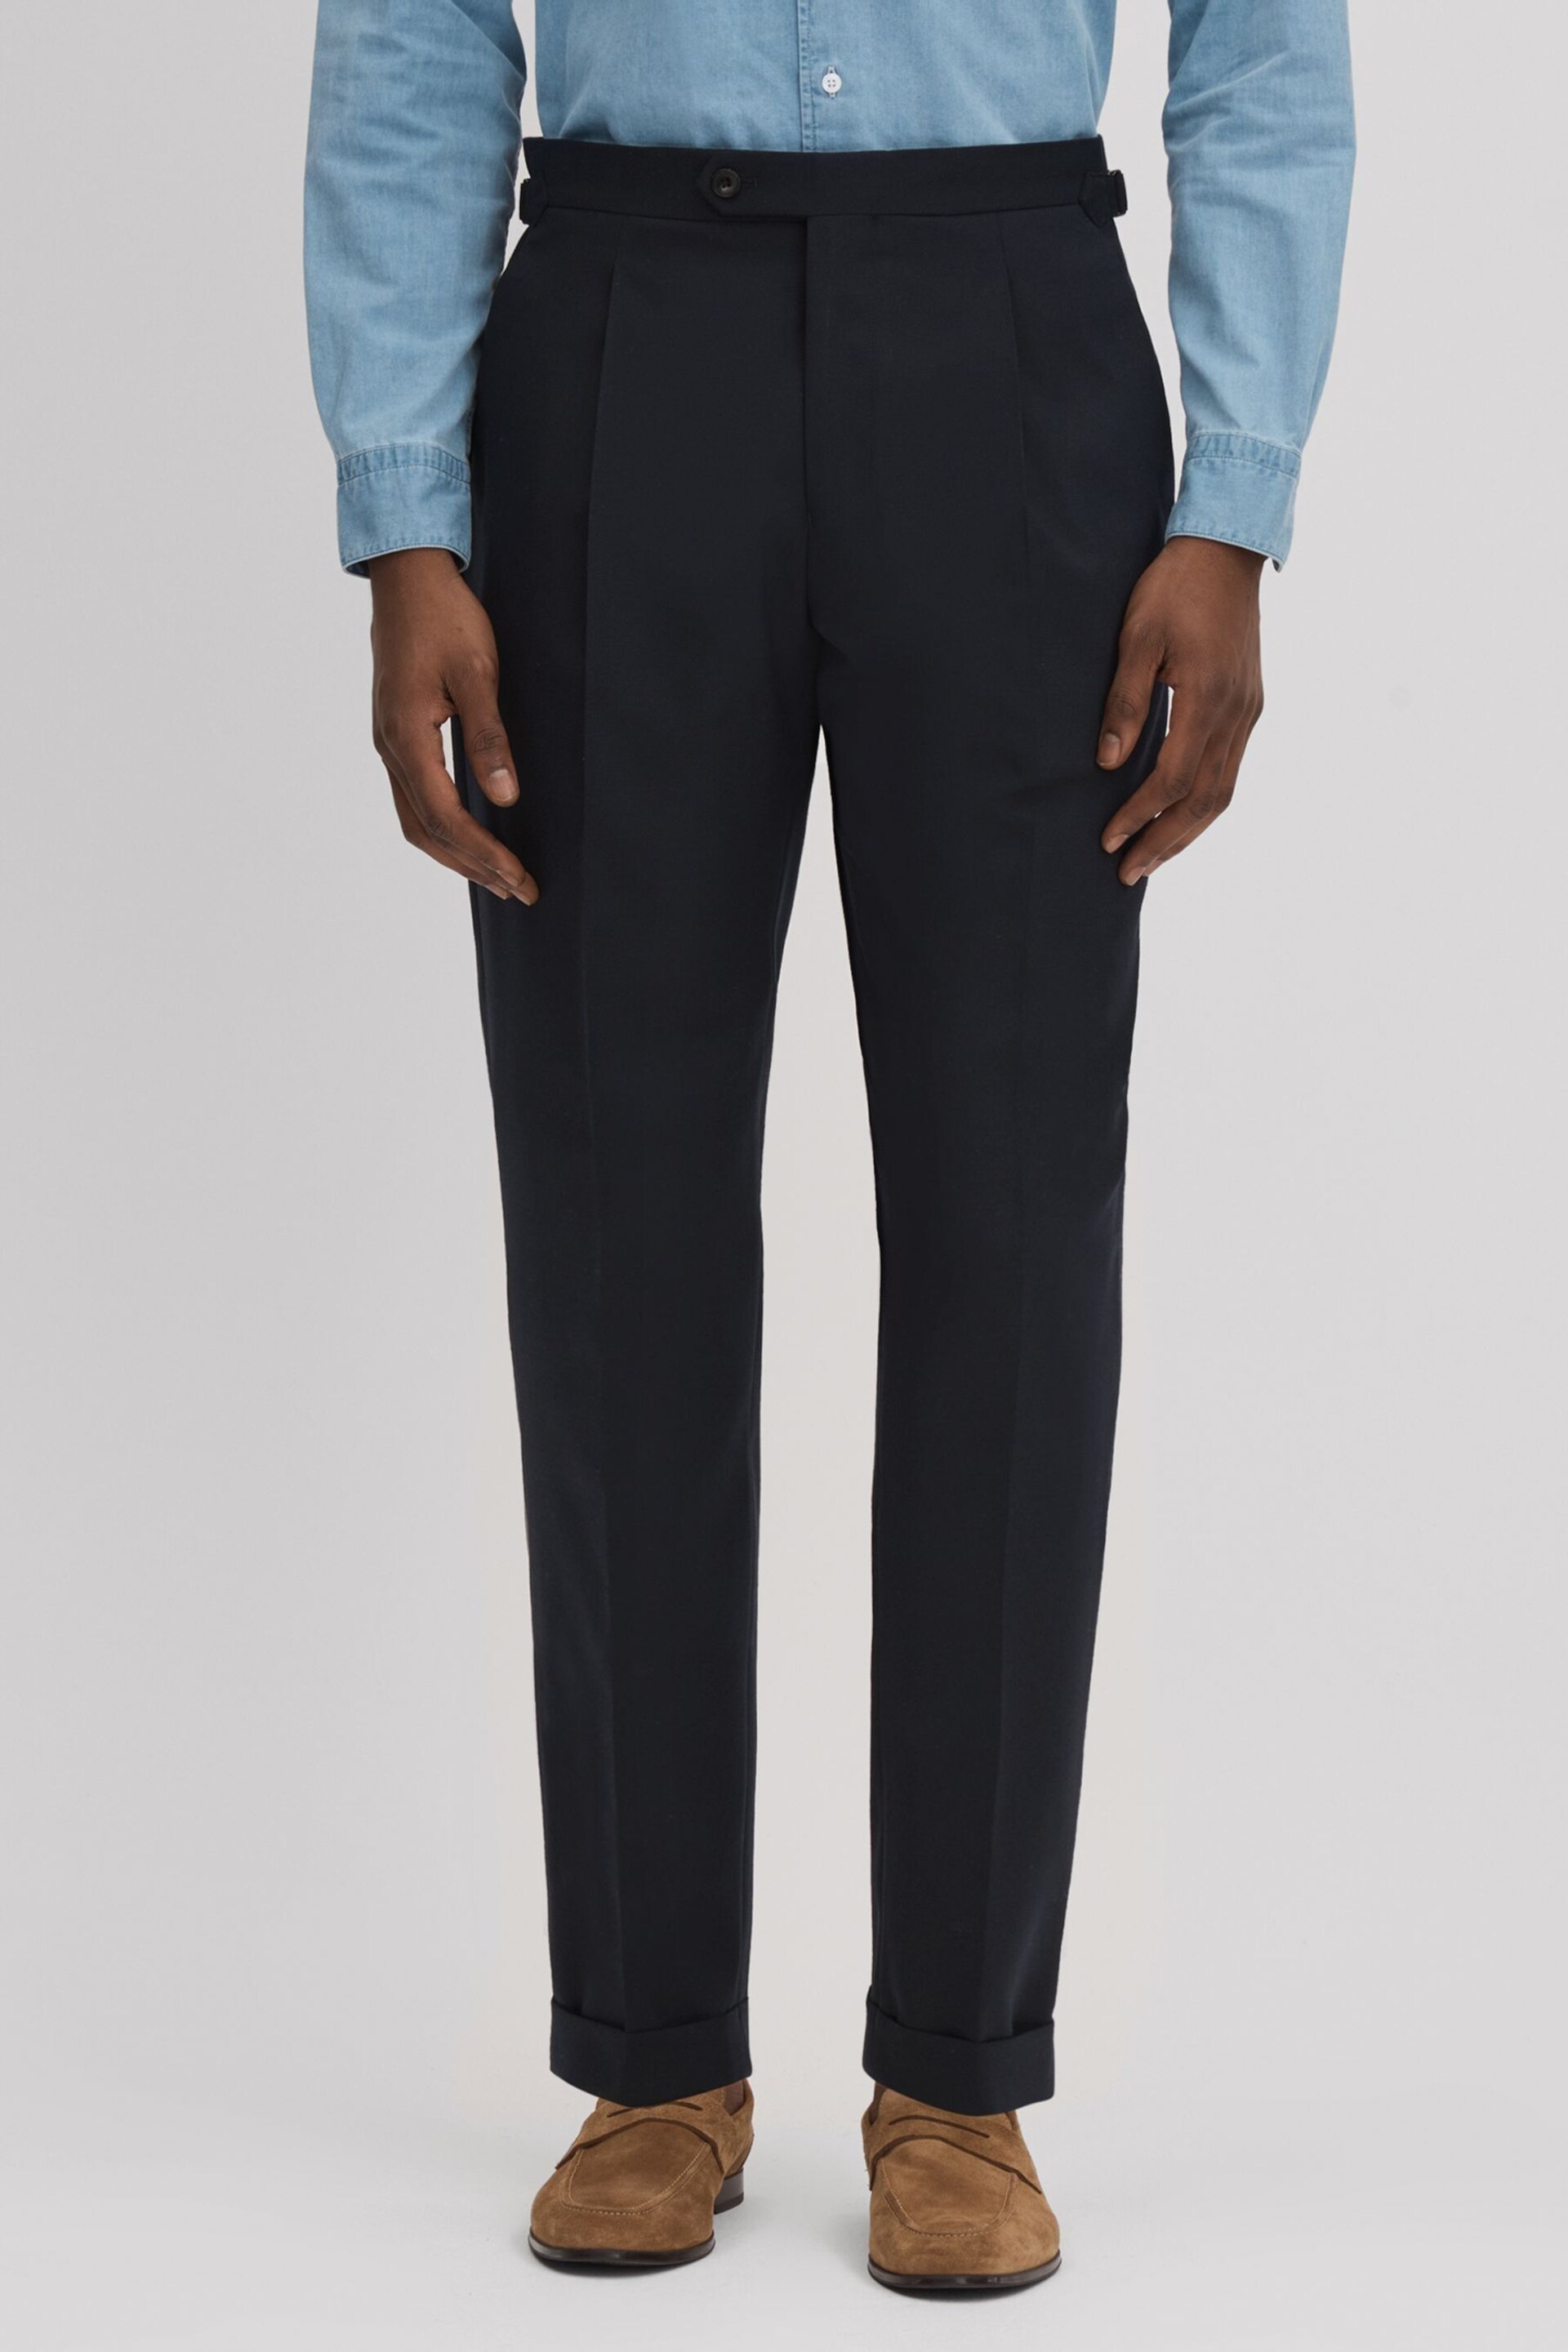 Reiss Navy Valentine Slim Fit Wool Blend Trousers with Turn-Ups - Image 1 of 5